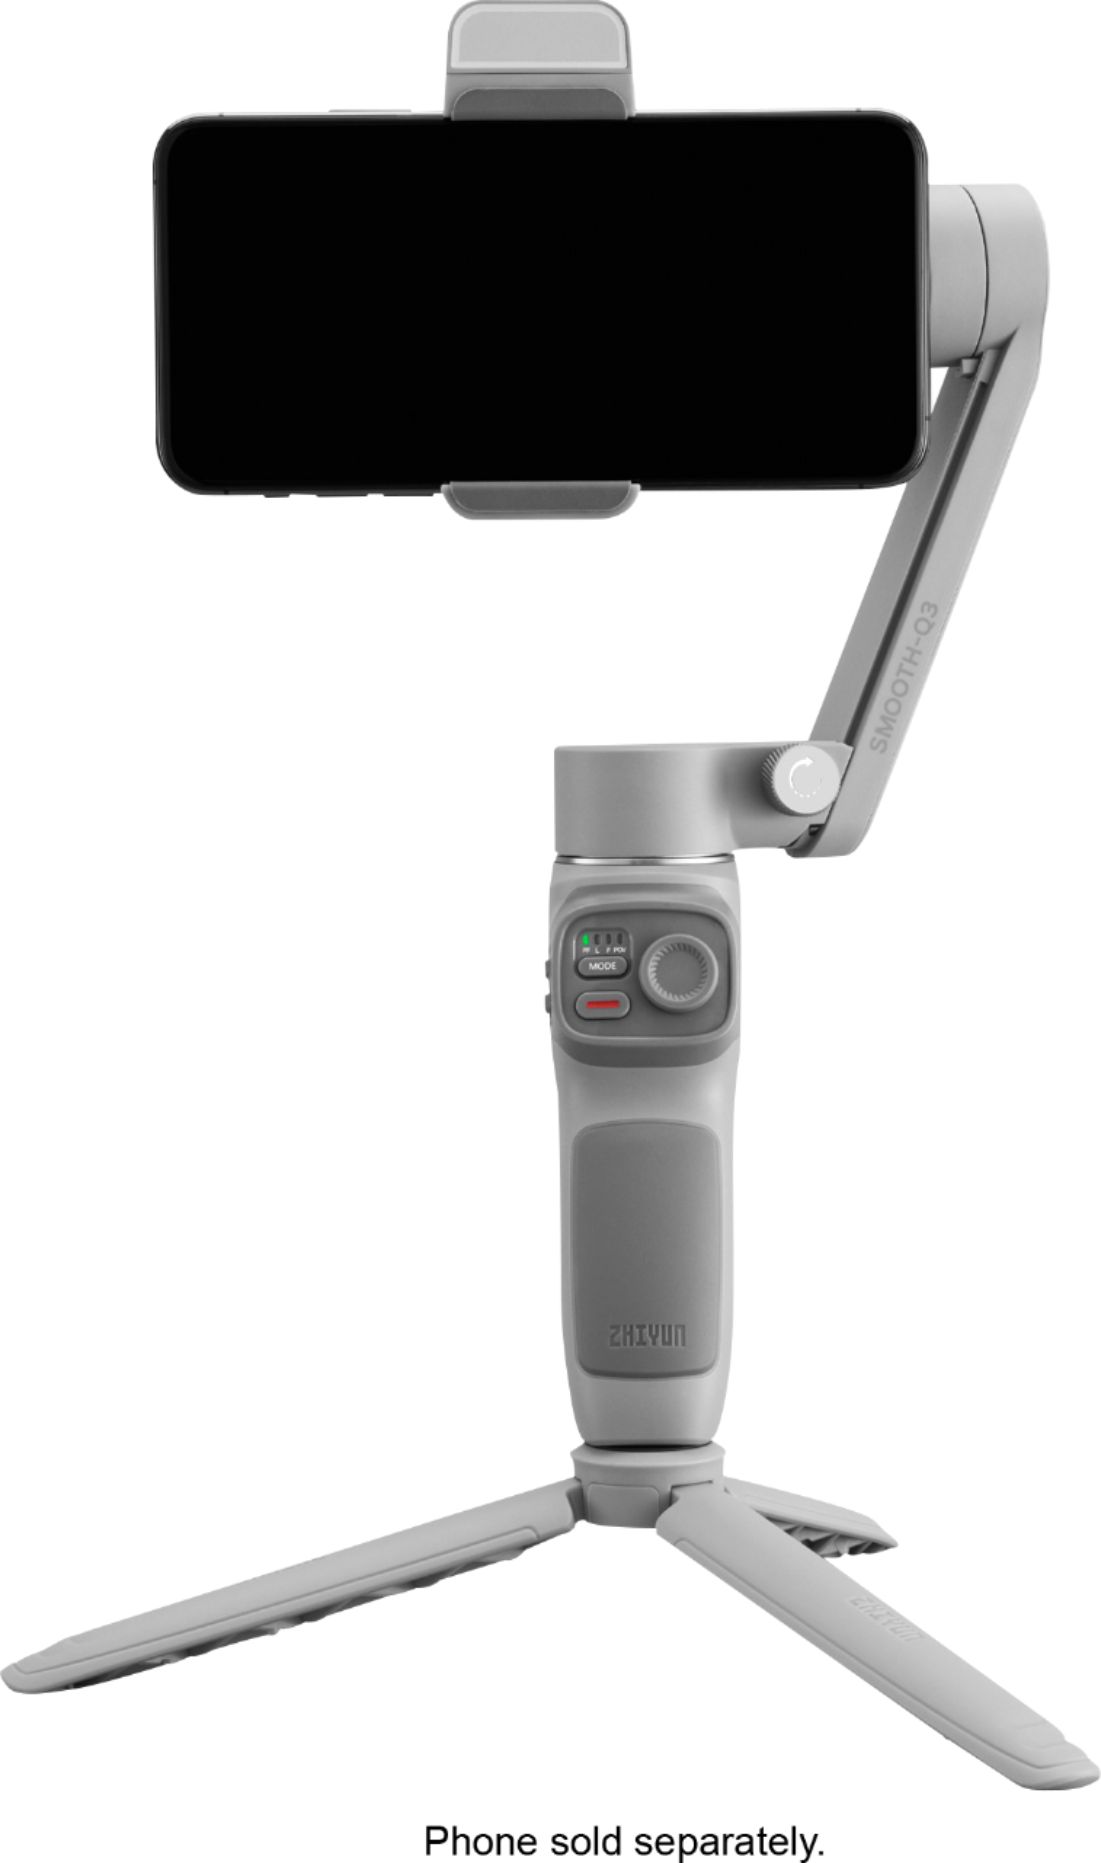 Left View: Zhiyun - Smooth Q3 Folding 3-Axis Gimbal Stabilizer for Smartphones with Built-in LED Video Light and Detachable Tri-pod Stand - Gray